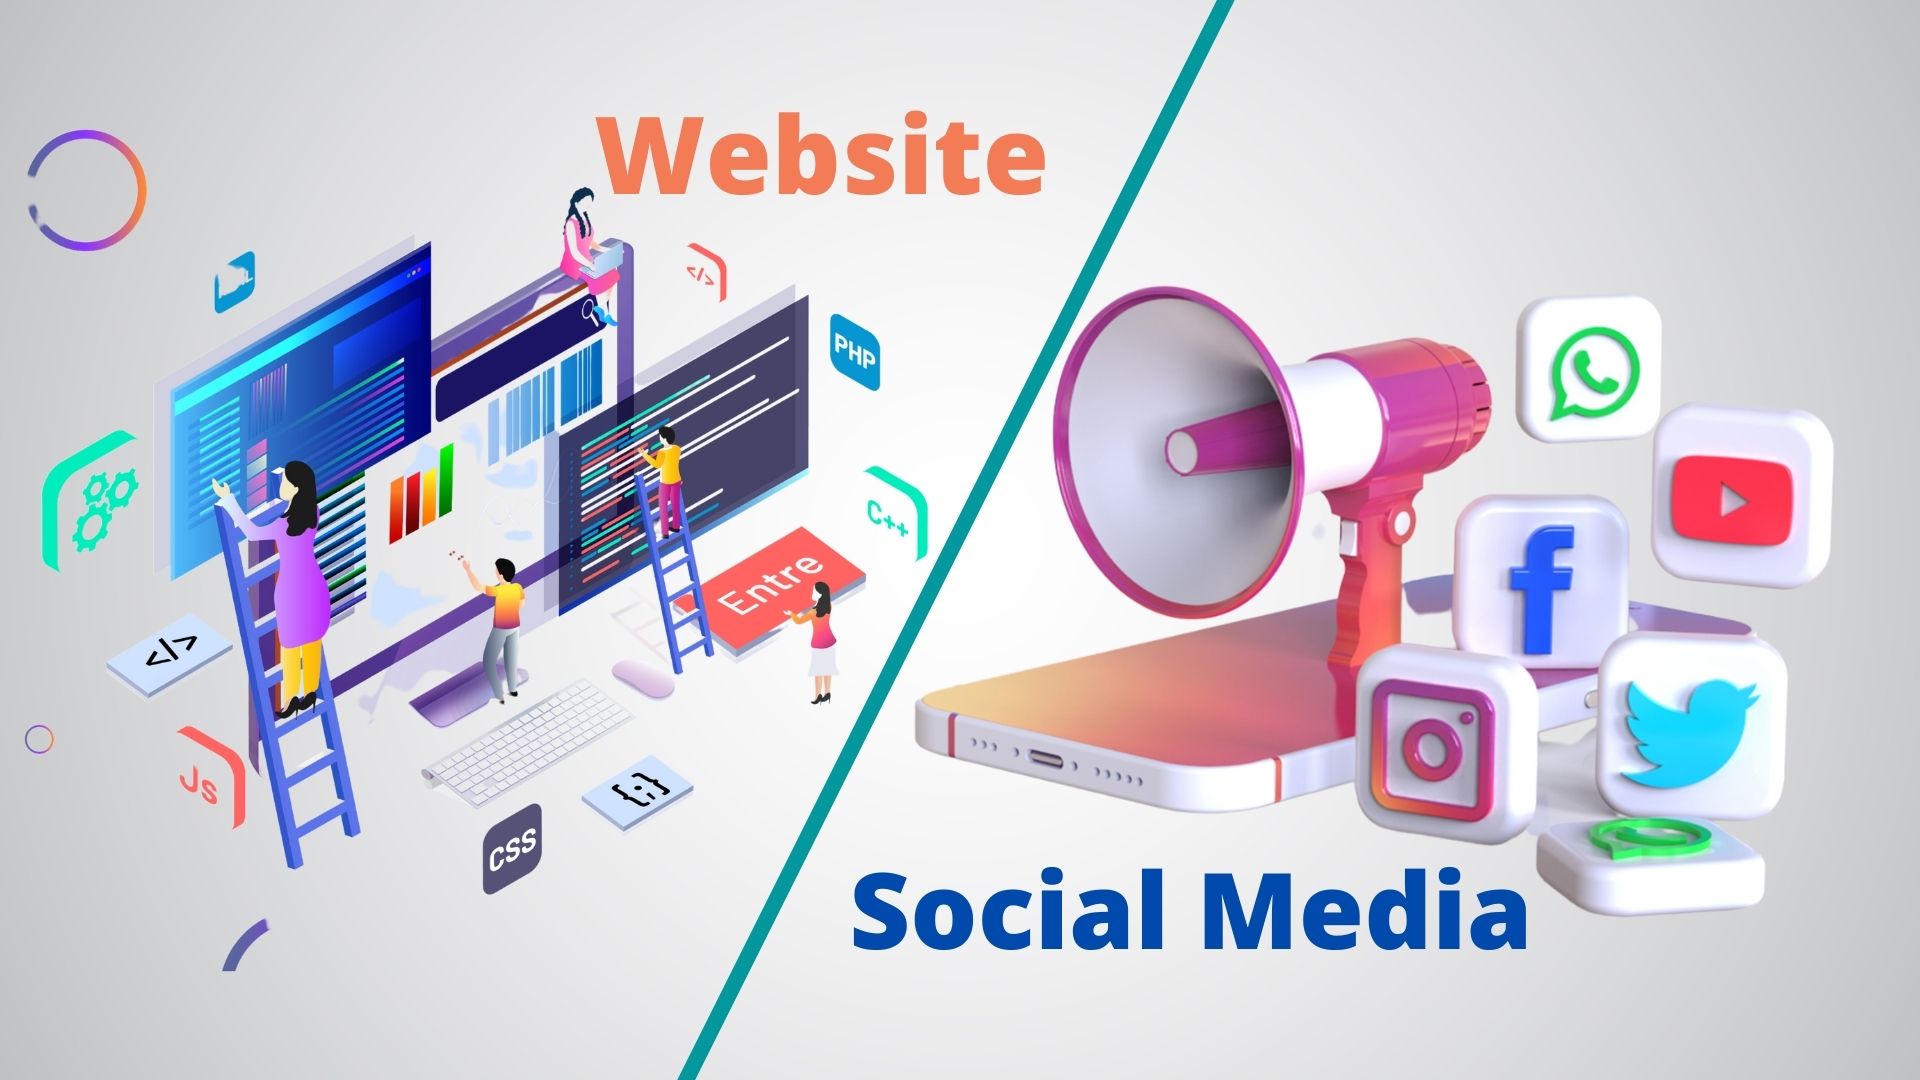 You are currently viewing How to Manage Your Website and Social Media Together